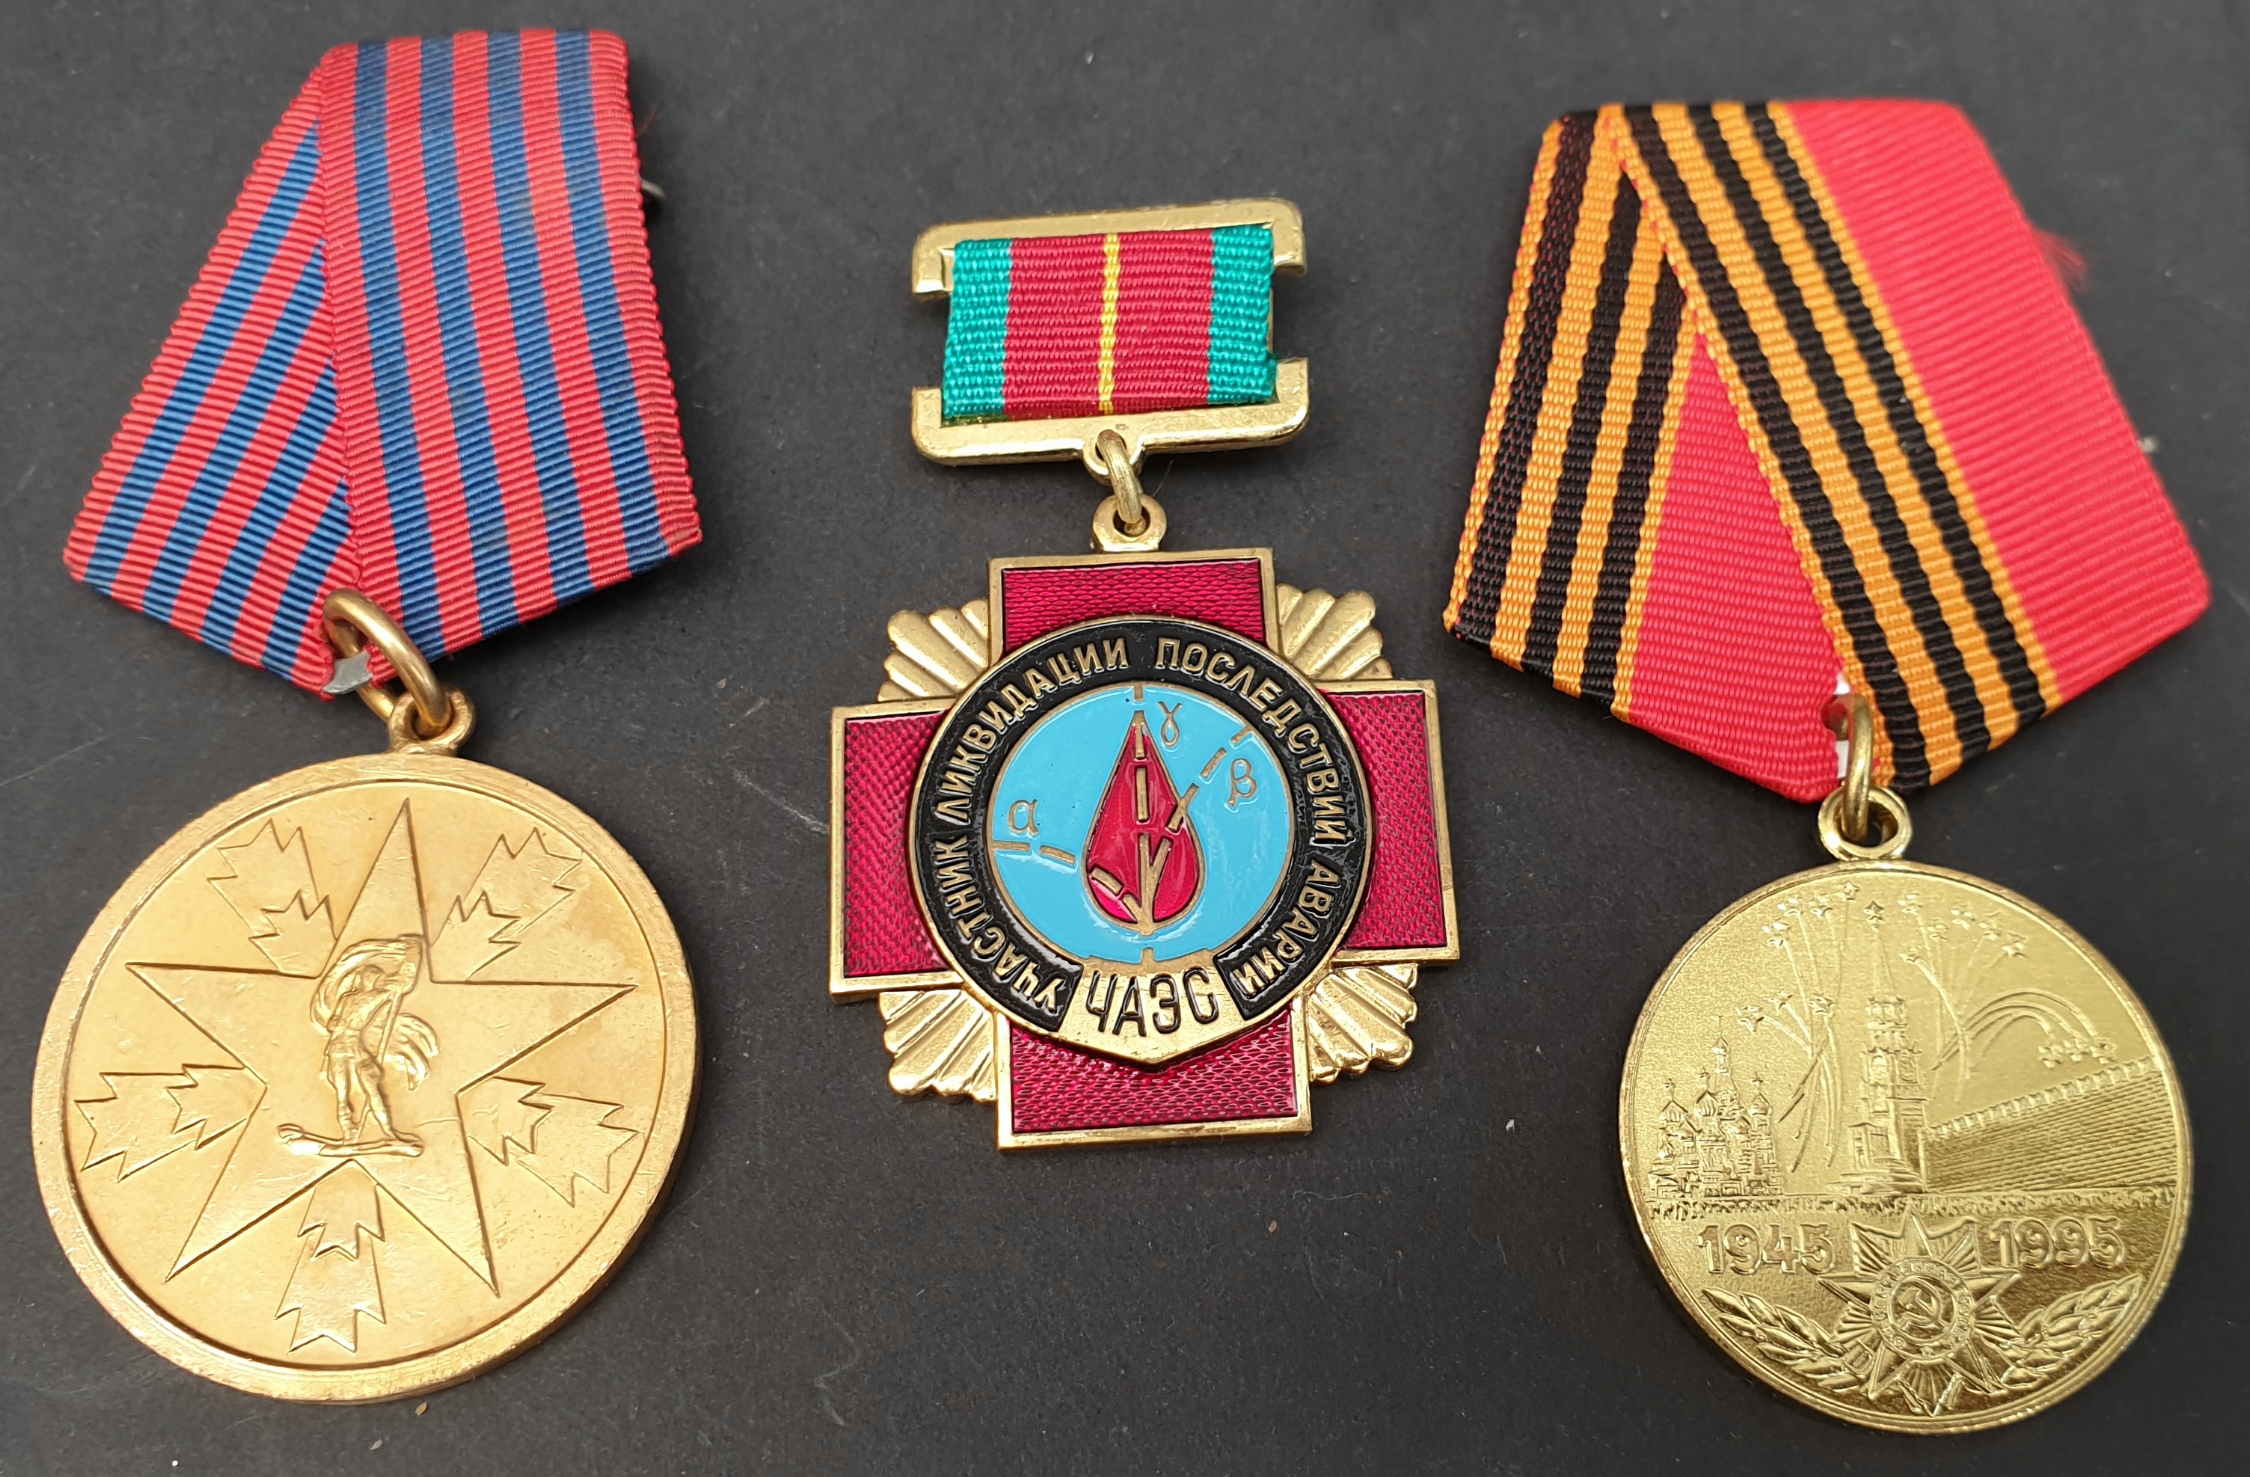 Vintage Russian & Yugoslavian Military Medals 3 in Total